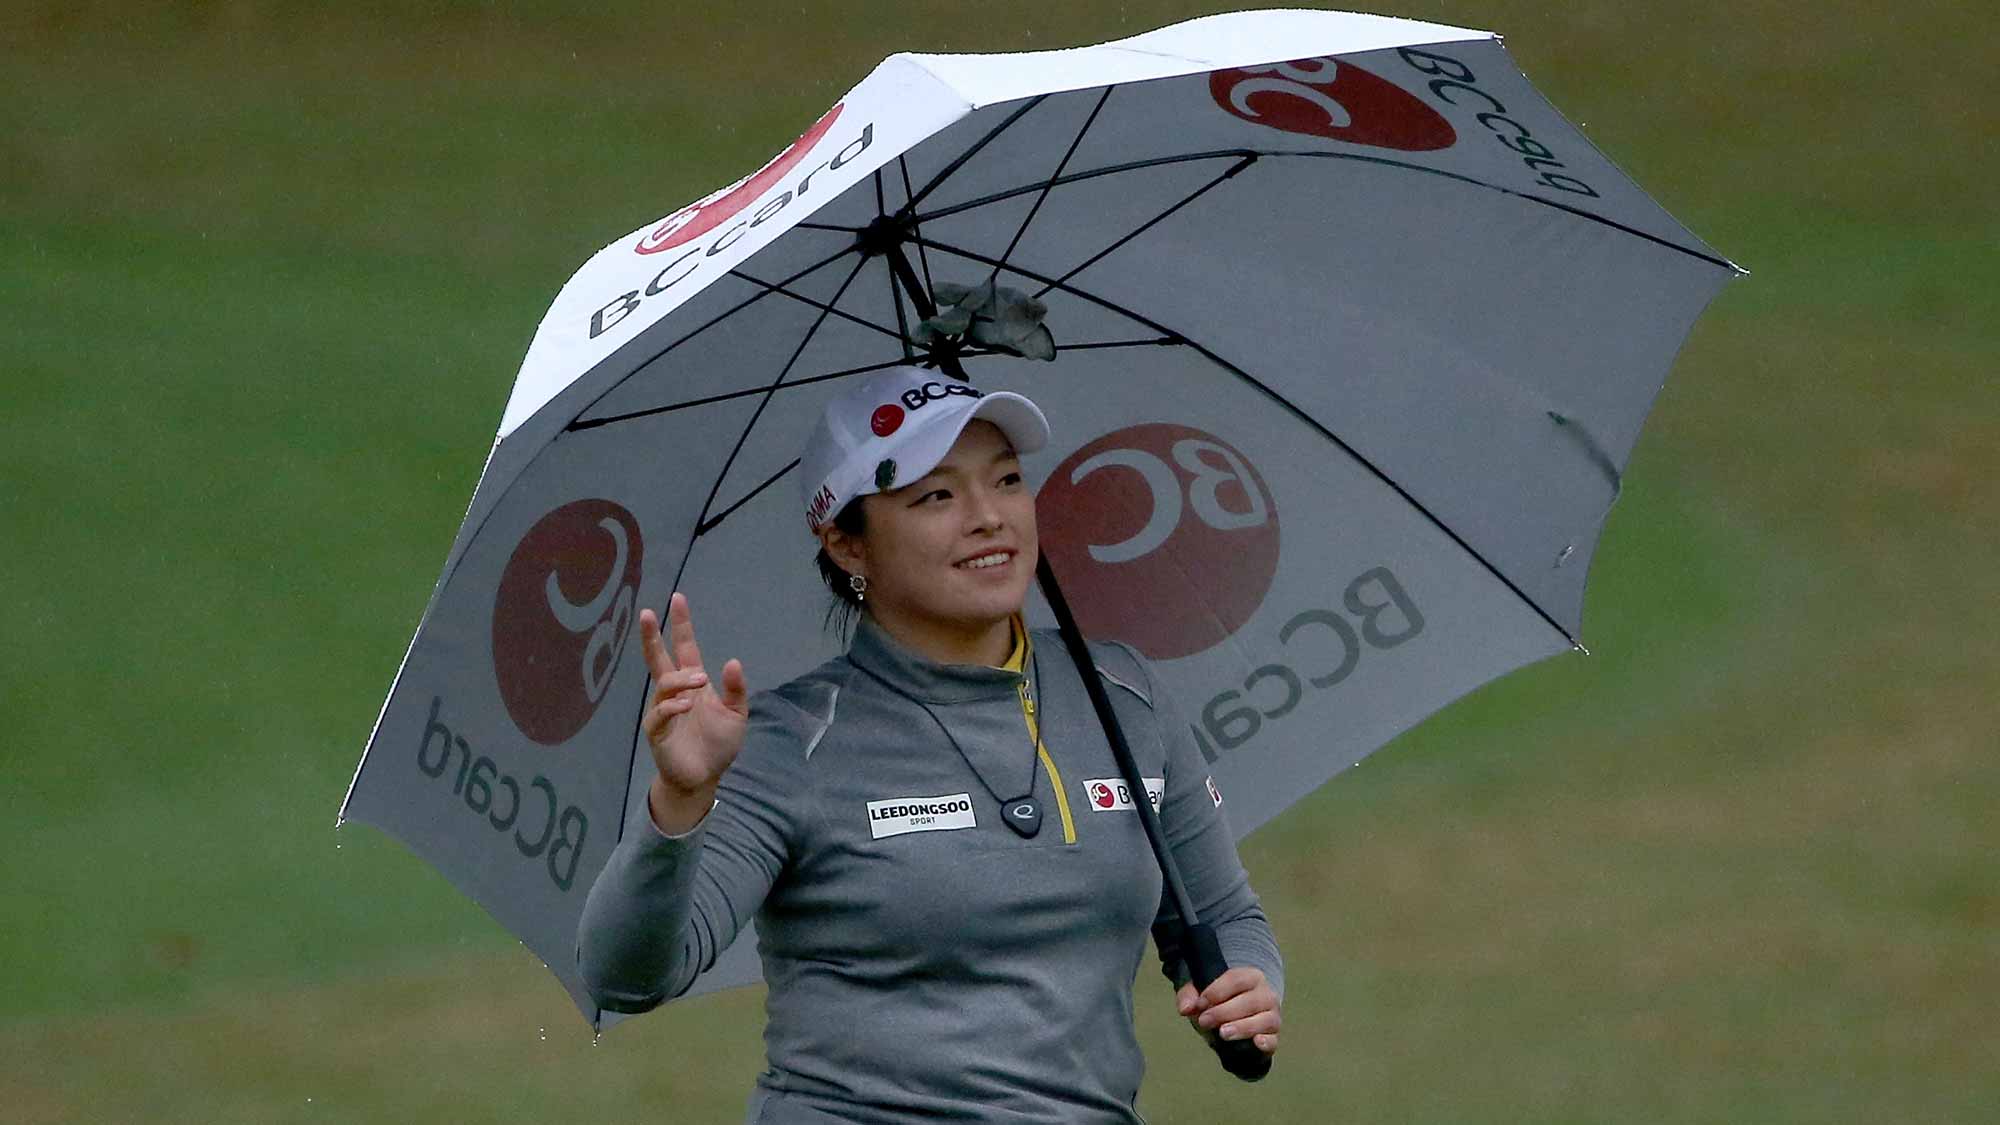 Ha Na Jang of South Korea acknowledges the crowd on the 18th hole during the final round of the Coates Golf Championship Presented By R+L Carriers at Golden Ocala Golf Club